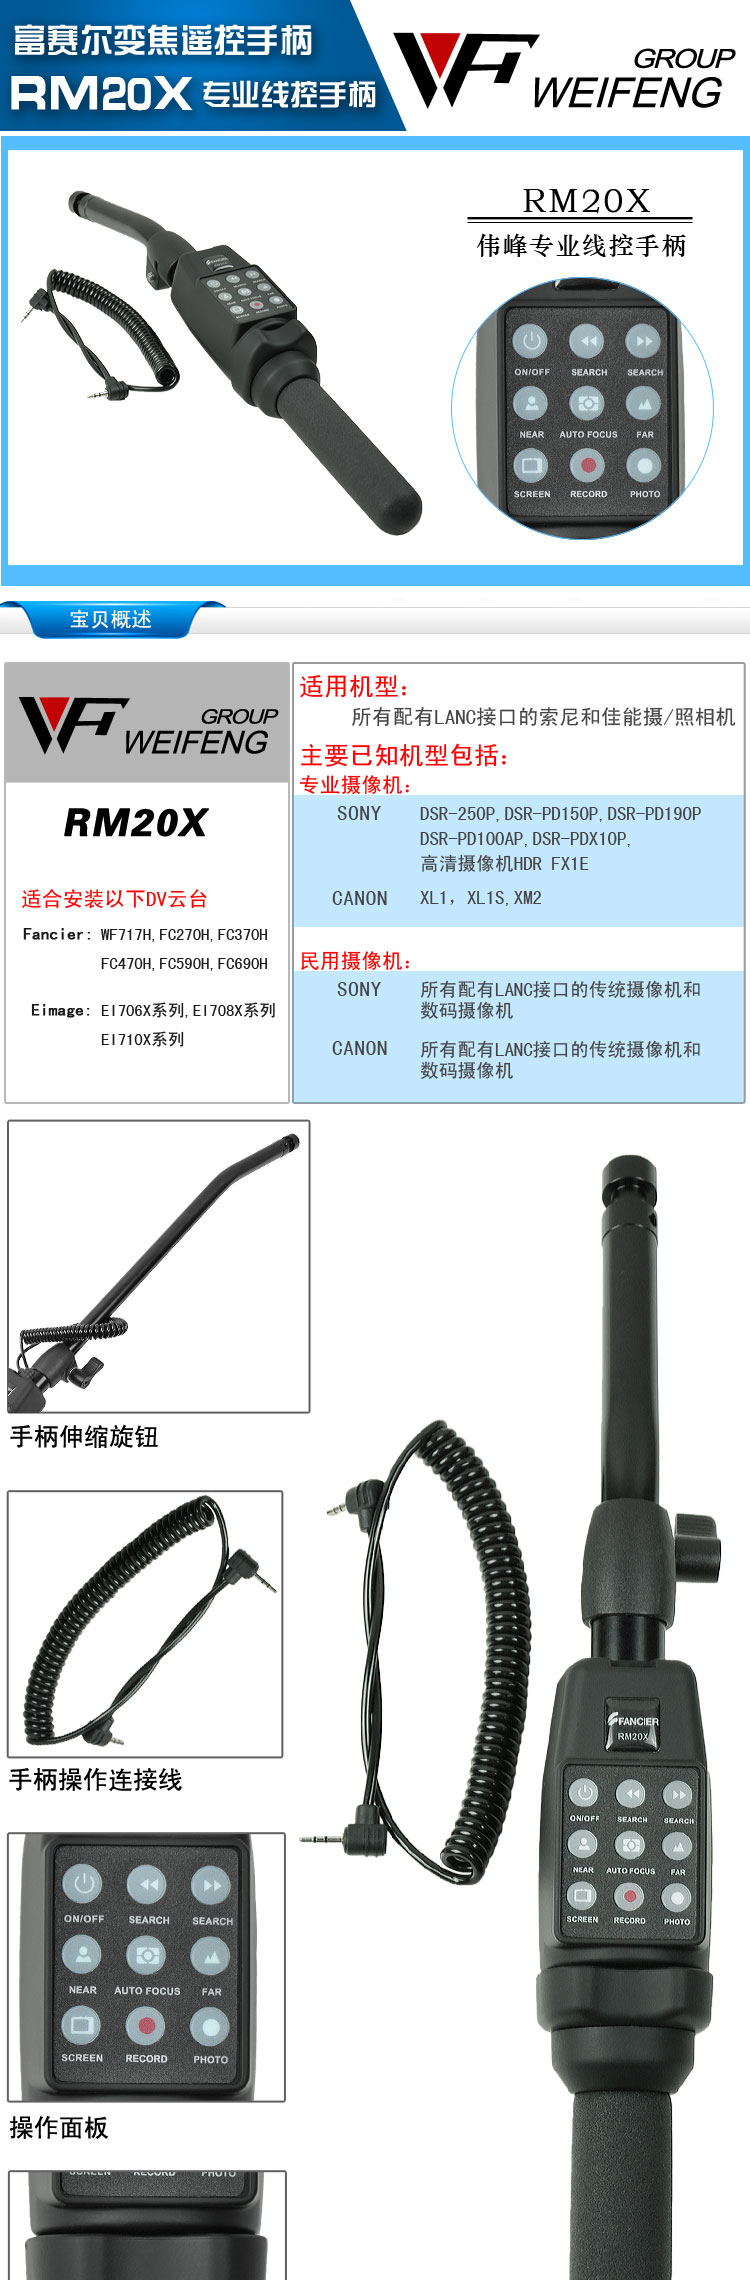 WF / Weifeng FanCier / Rich Purcell wire handle professional camera tripod with 717 270A